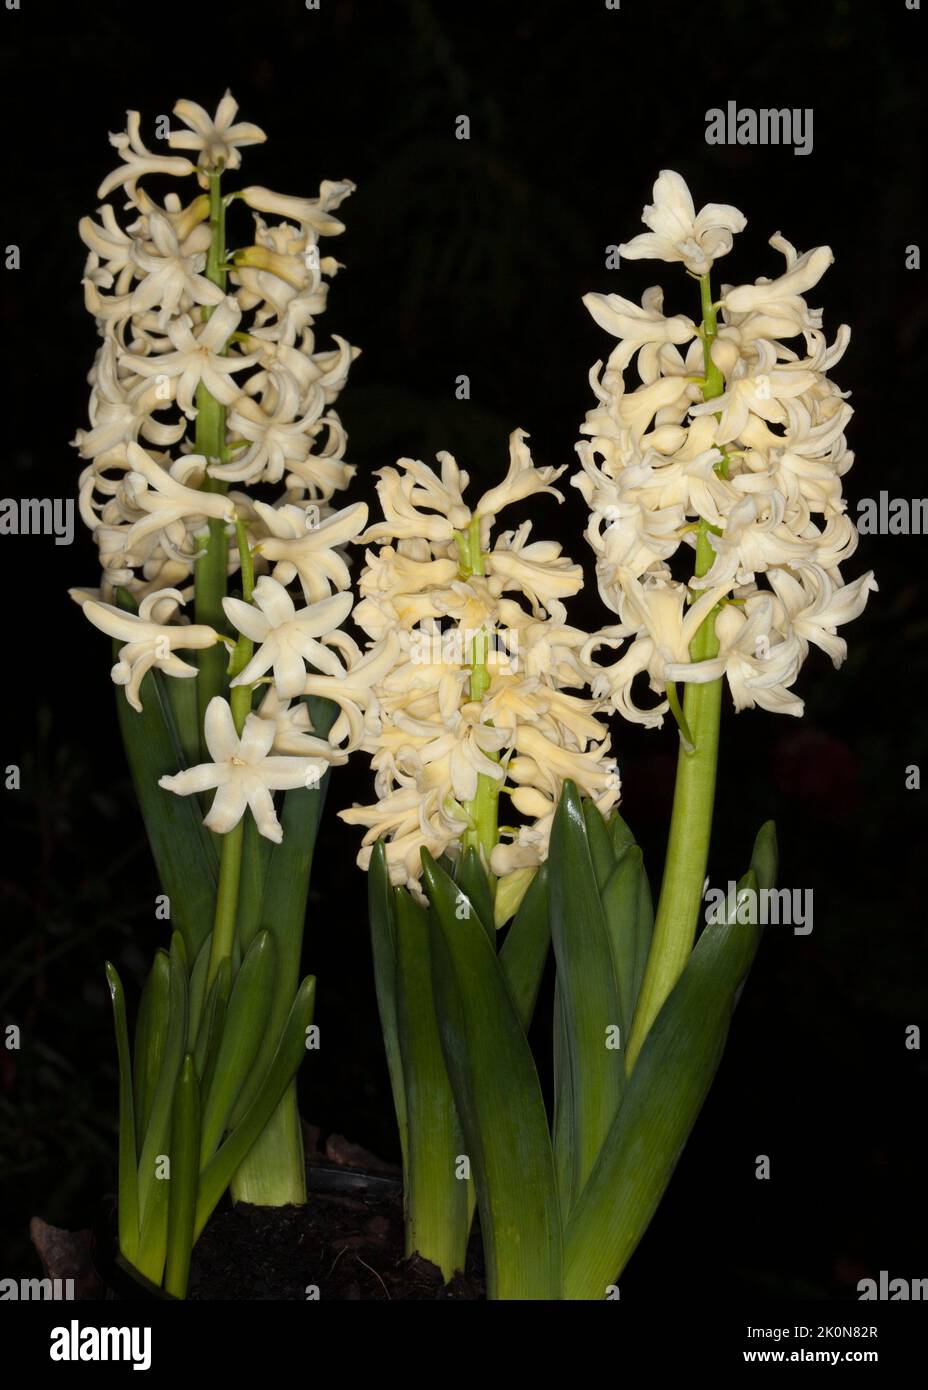 Cluster of pale yellow perfumed flowers of Hyacinth orientalis 'Yellowstone', spring-flowering bulb against dark background, in Australia Stock Photo